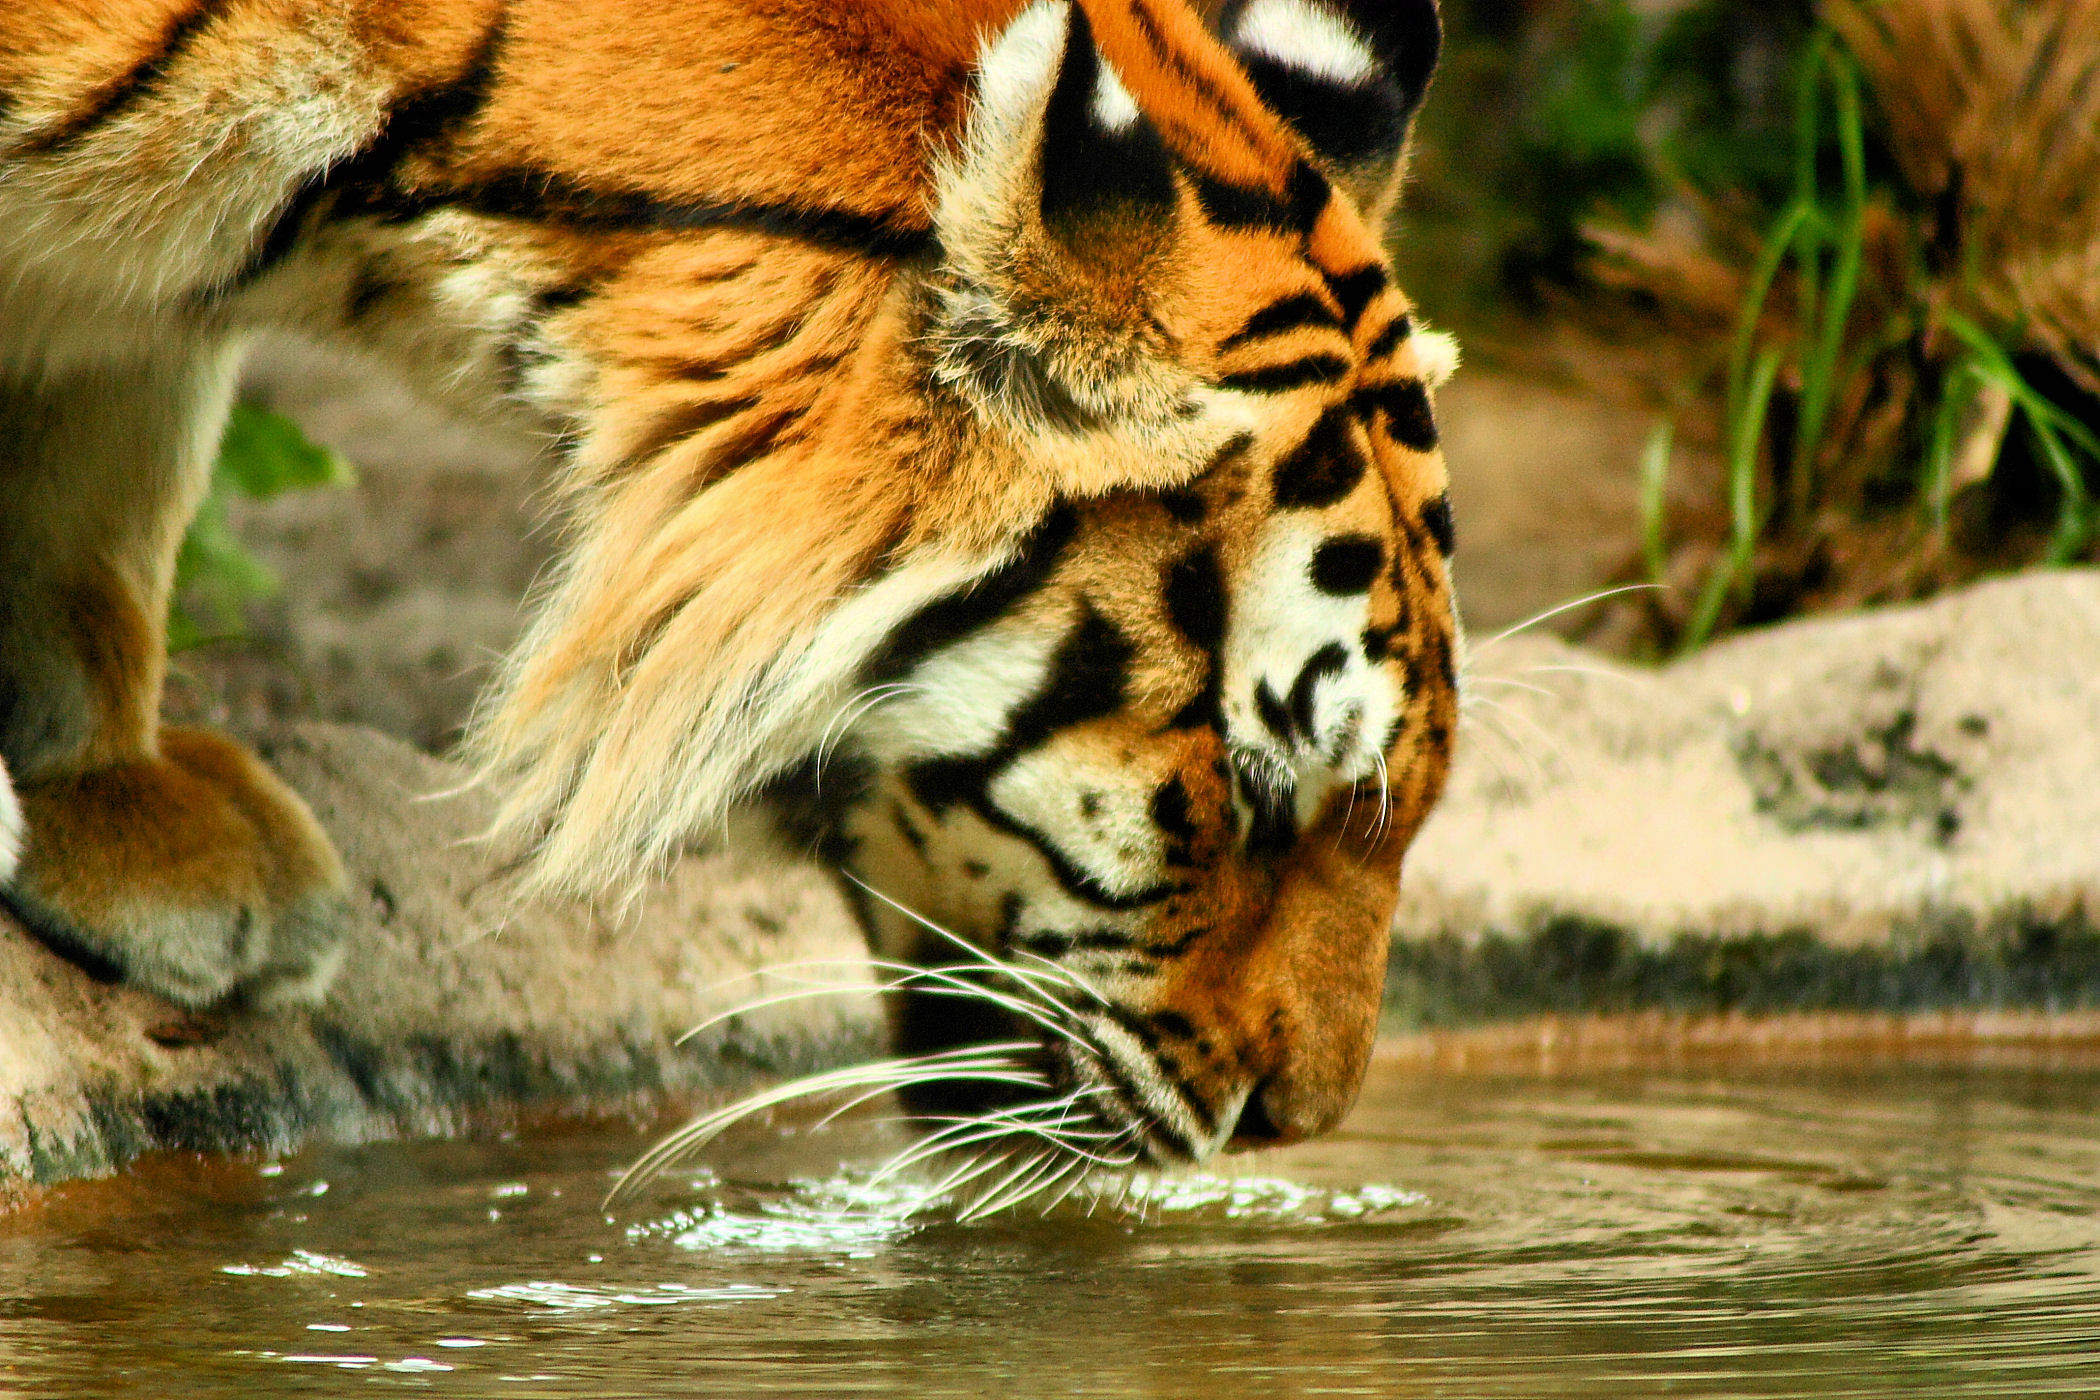 photographs of water | ... search terms tiger water tigers drinking ...